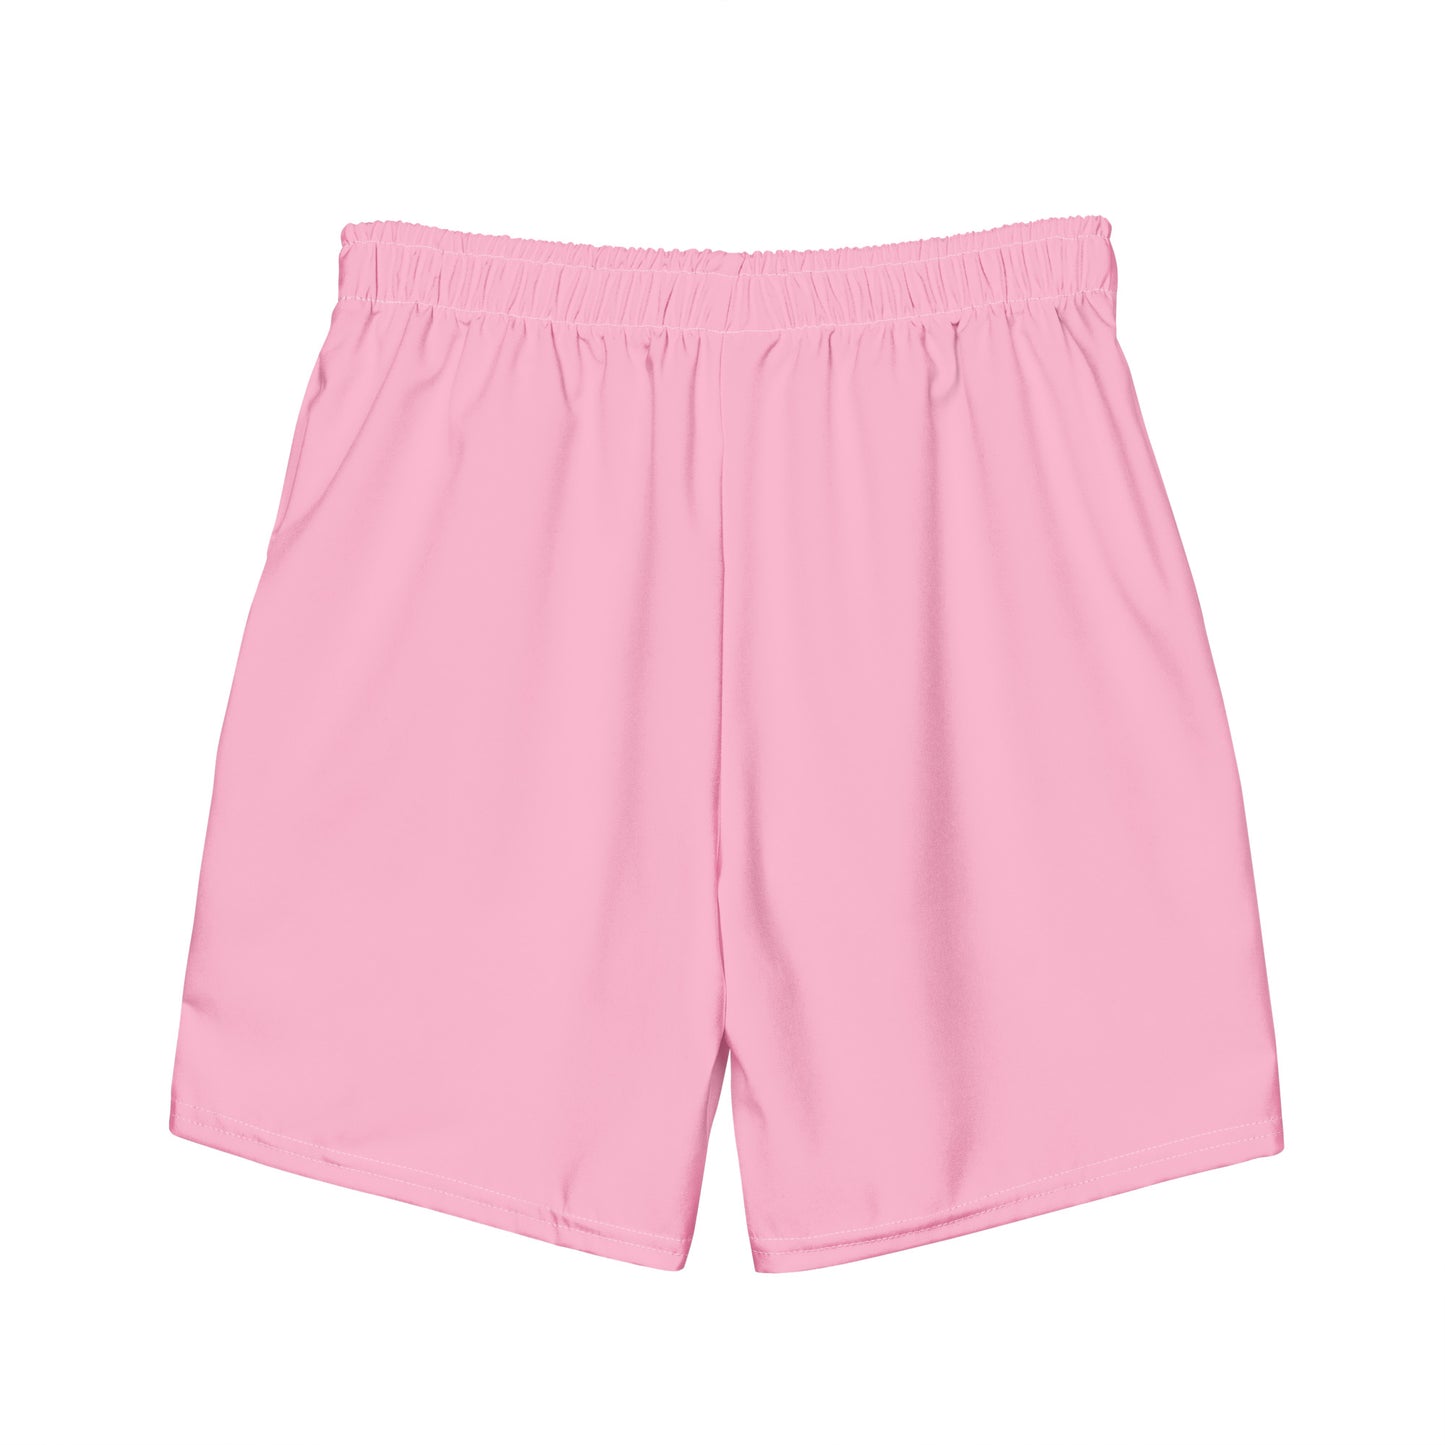 All-Over Print Recycled Swim Shorts: Cotton Candy Pink